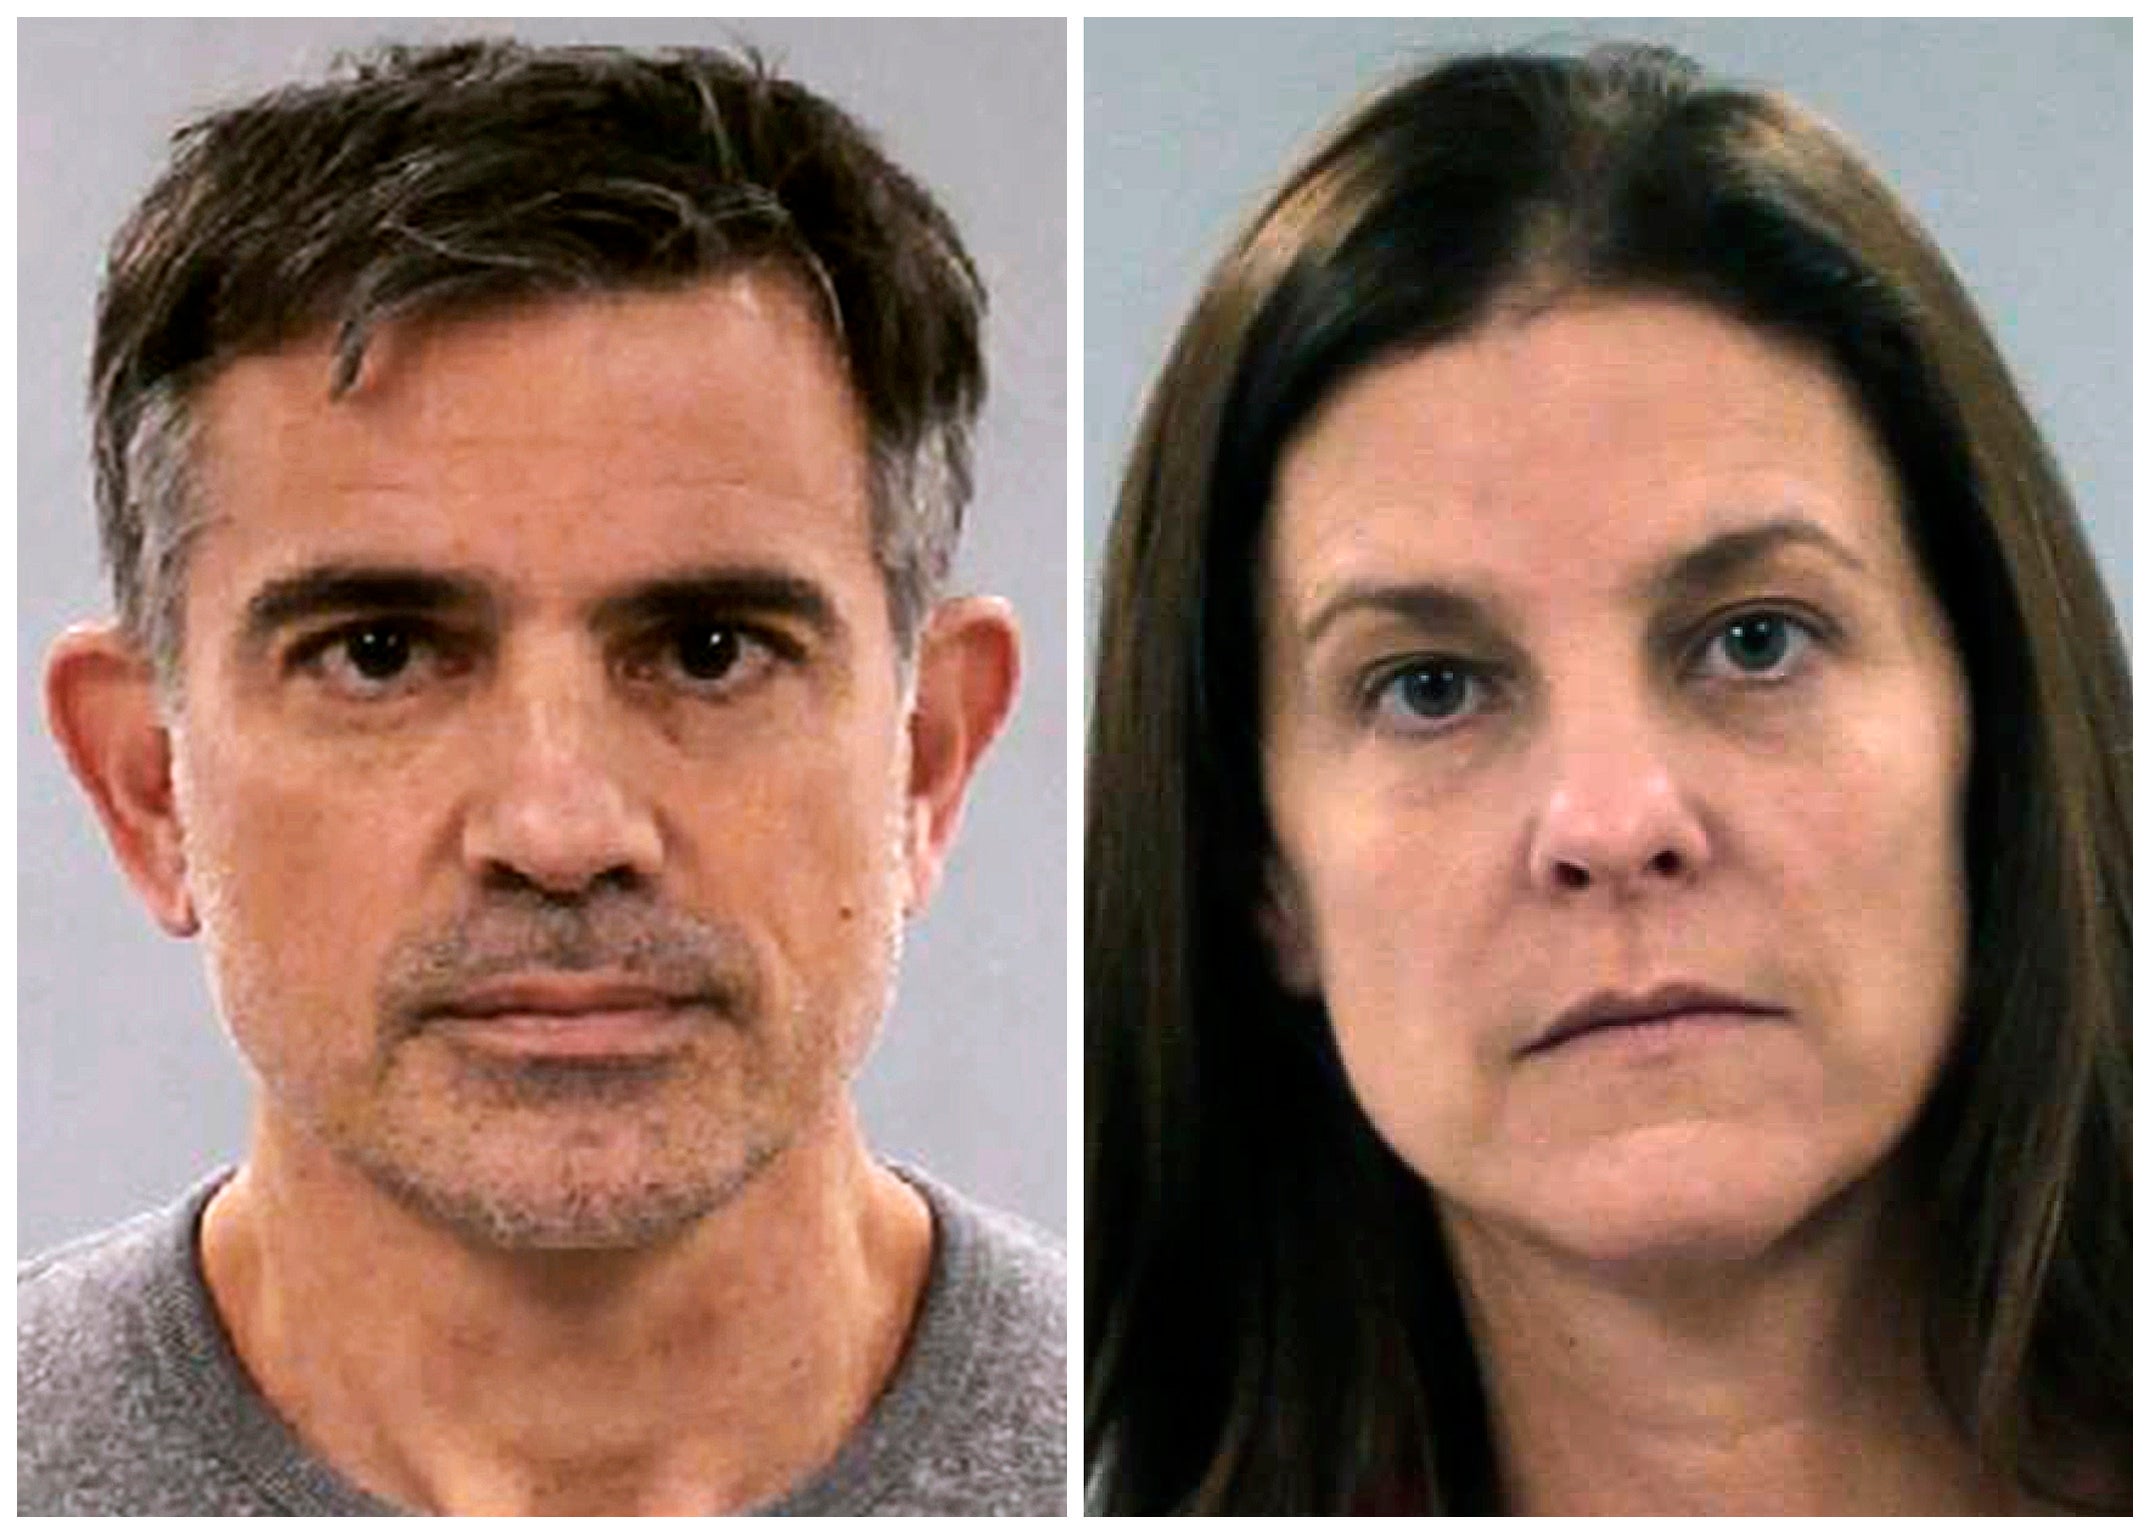 Fotis Dulos, left, and his girlfriend Michelle Troconis, were charged in 2020